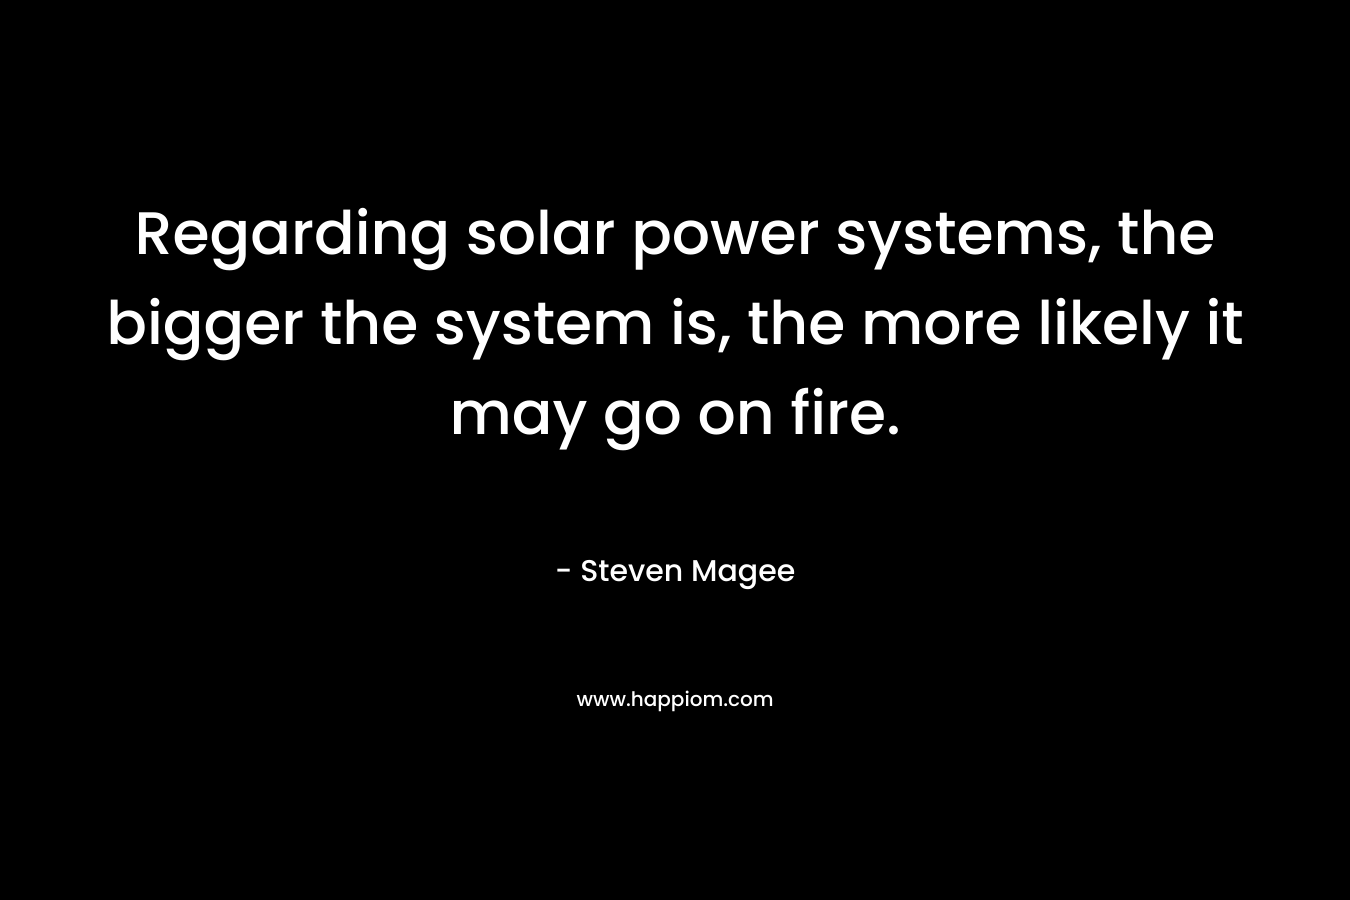 Regarding solar power systems, the bigger the system is, the more likely it may go on fire. – Steven Magee